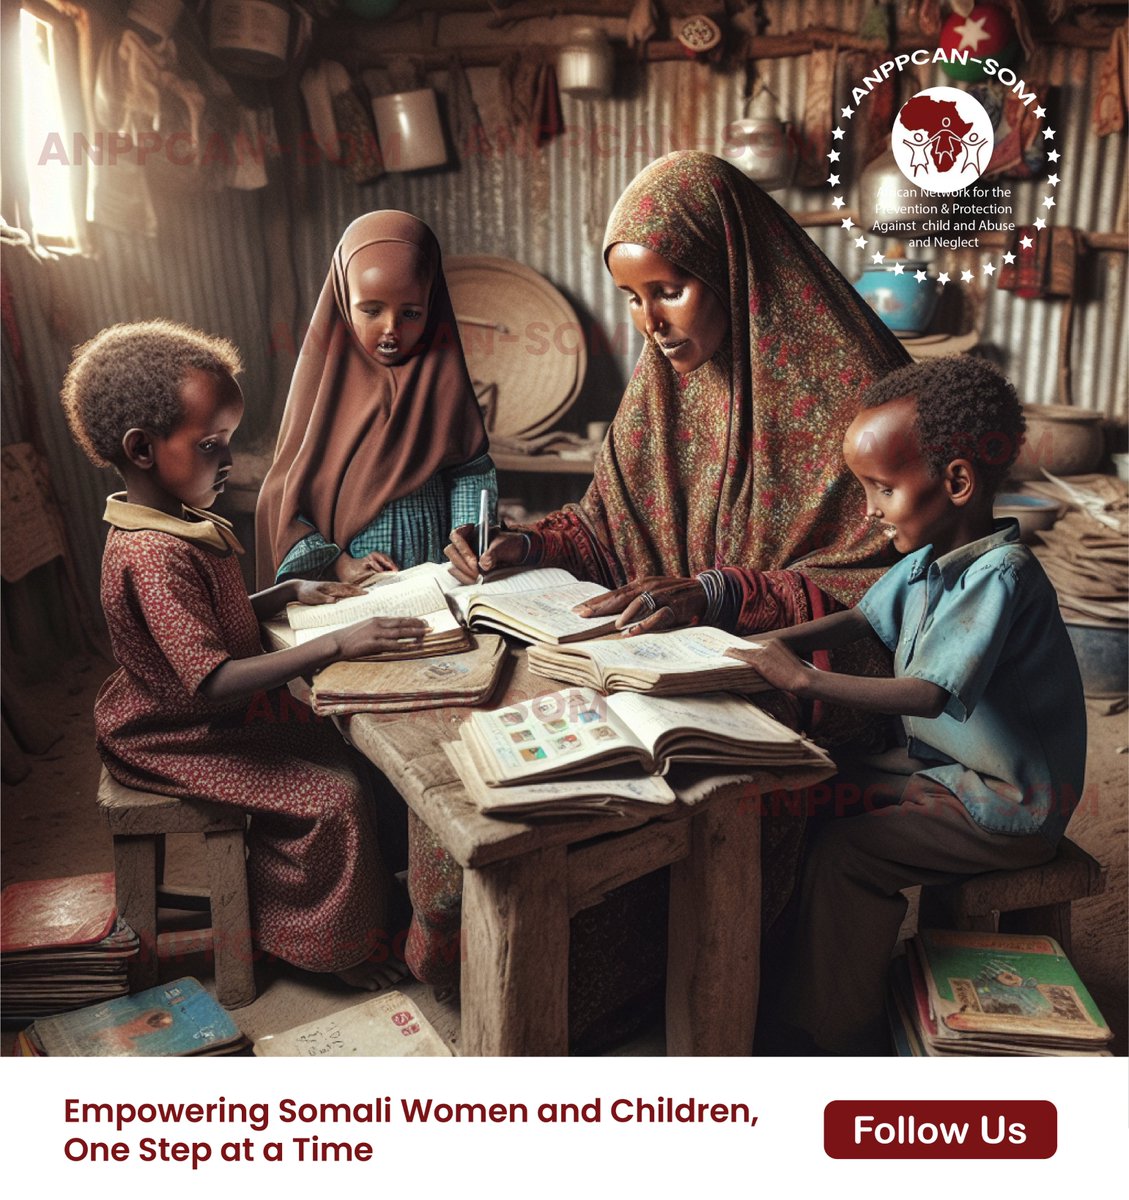 At ANPPCAN-SOM, we believe in meticulous planning and strategies to ensure the development and protection of Somali women and children, aligning with international charters and conventions. #Development #WomenEmpowerment